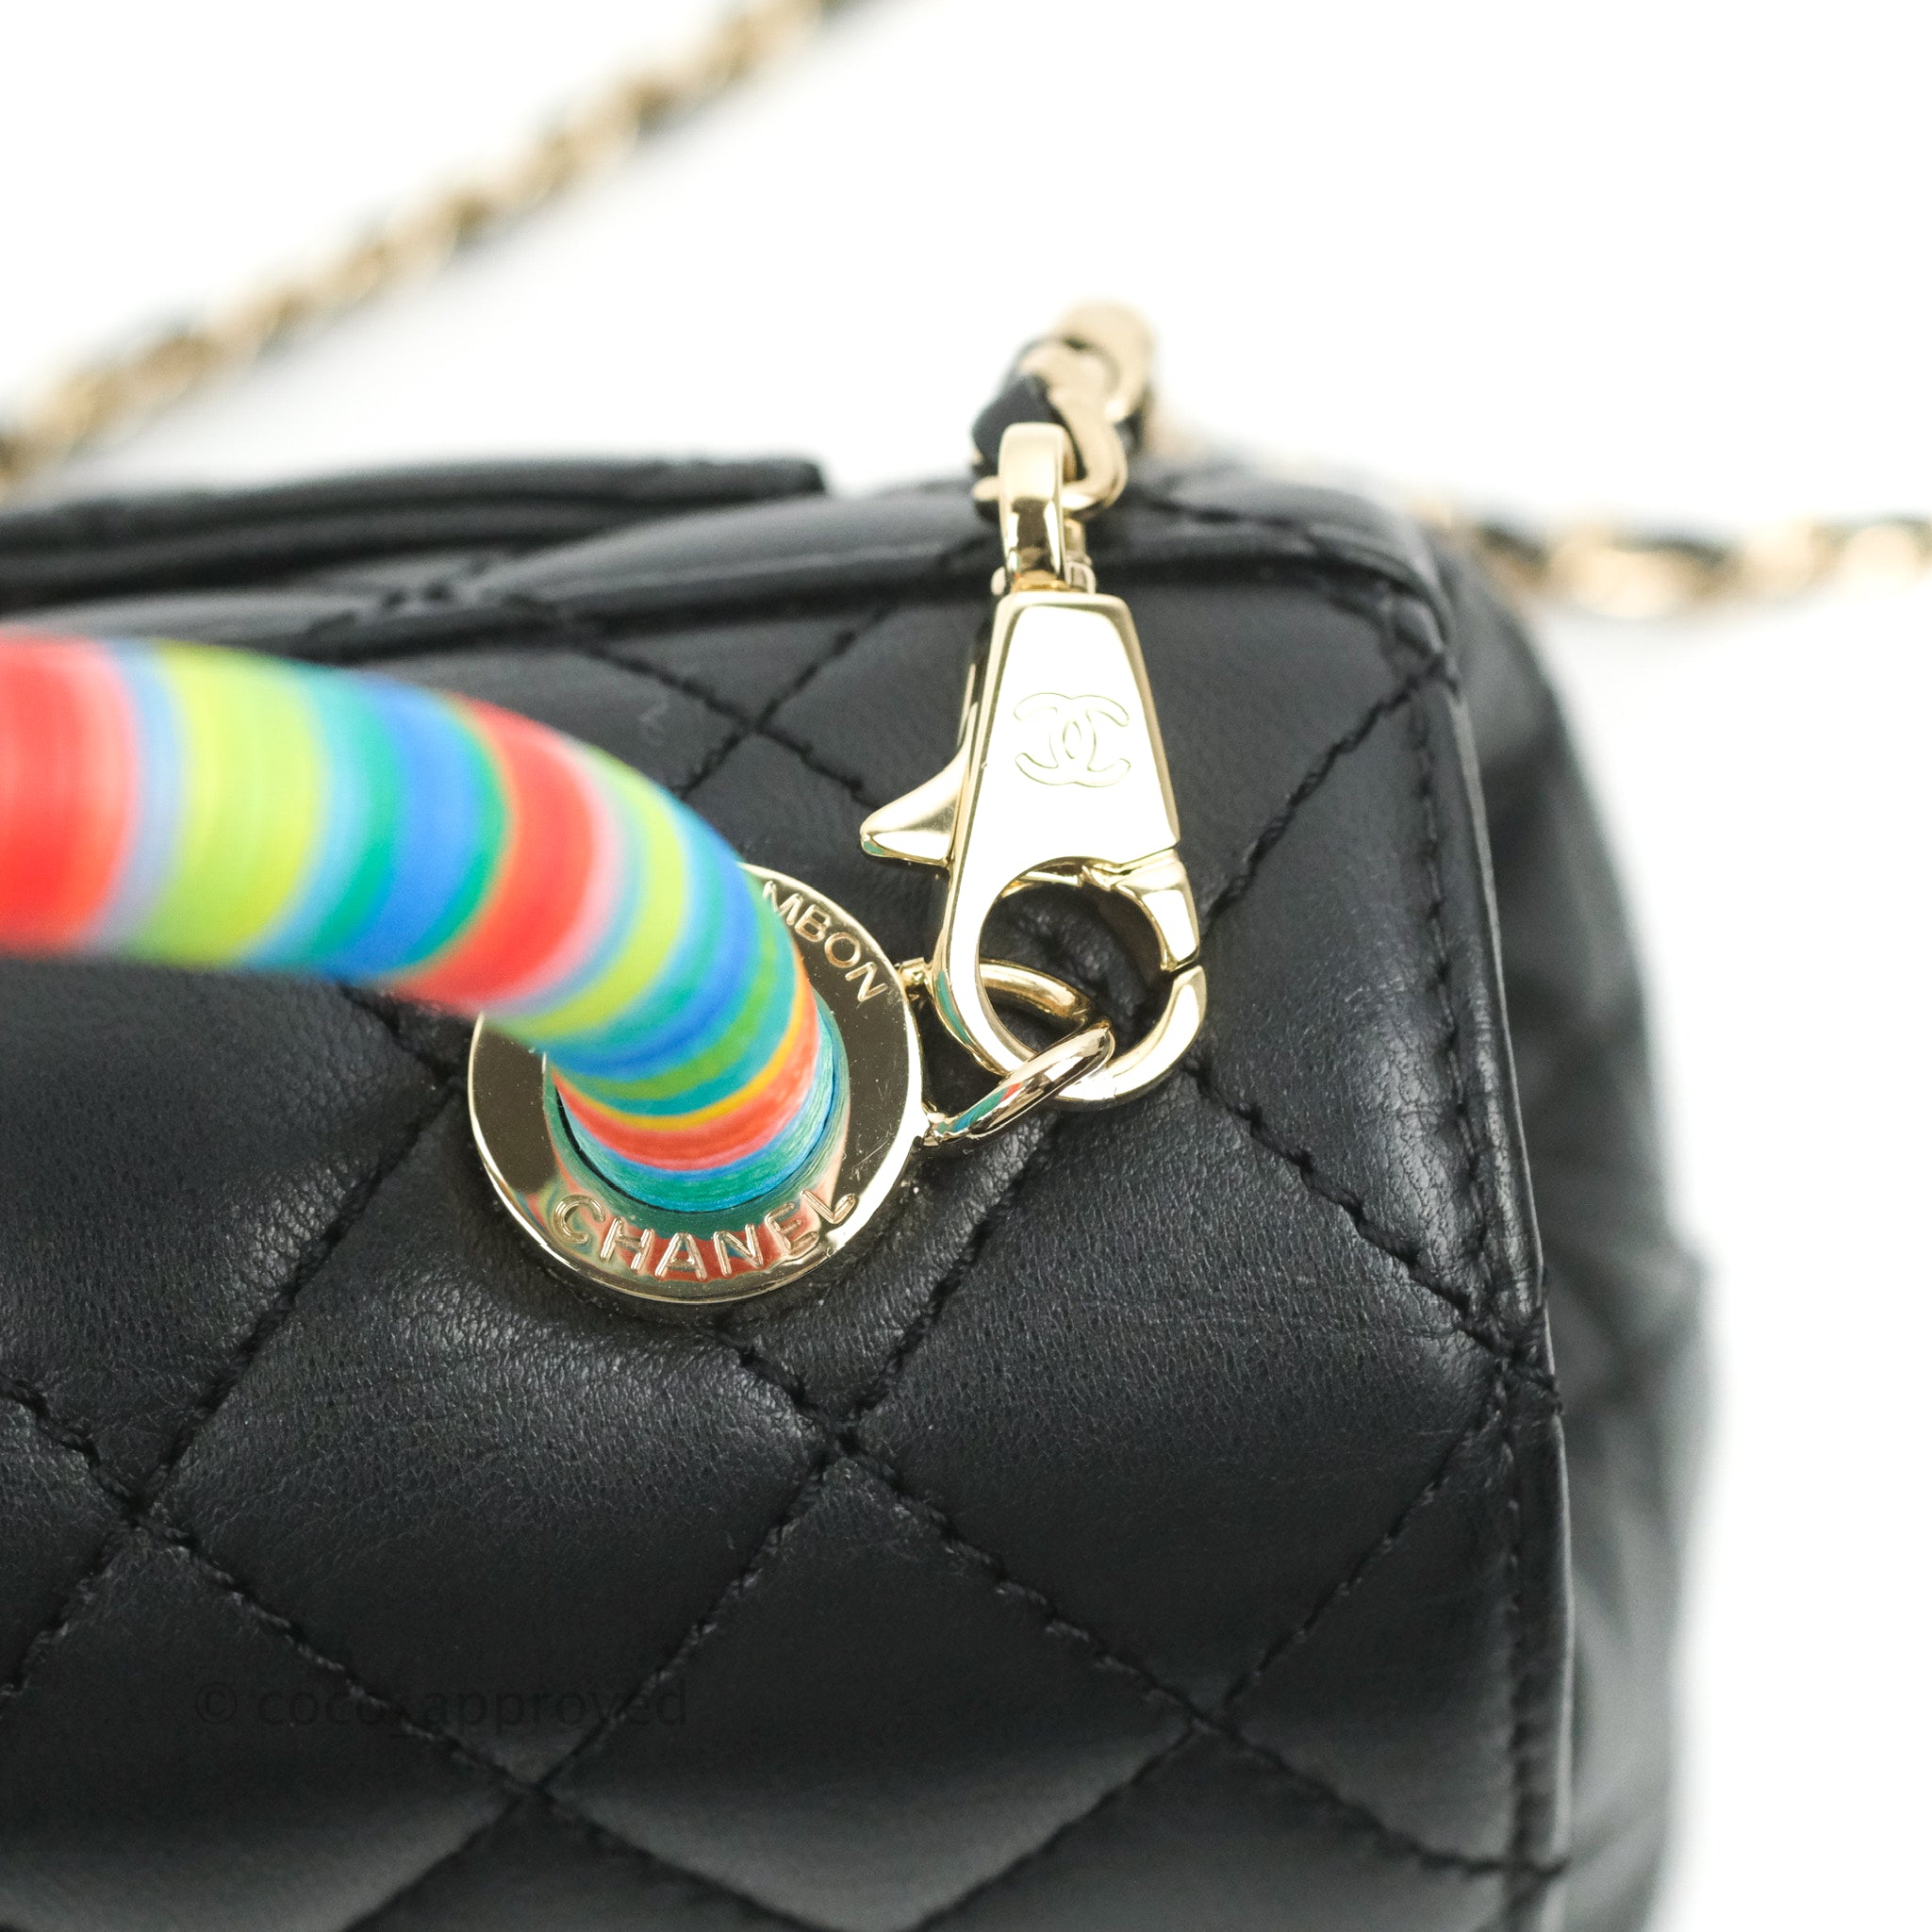 Chanel Quilted Extra Mini Rainbow Coco Handle Bag Lambskin Black Gold – Coco  Approved Studio